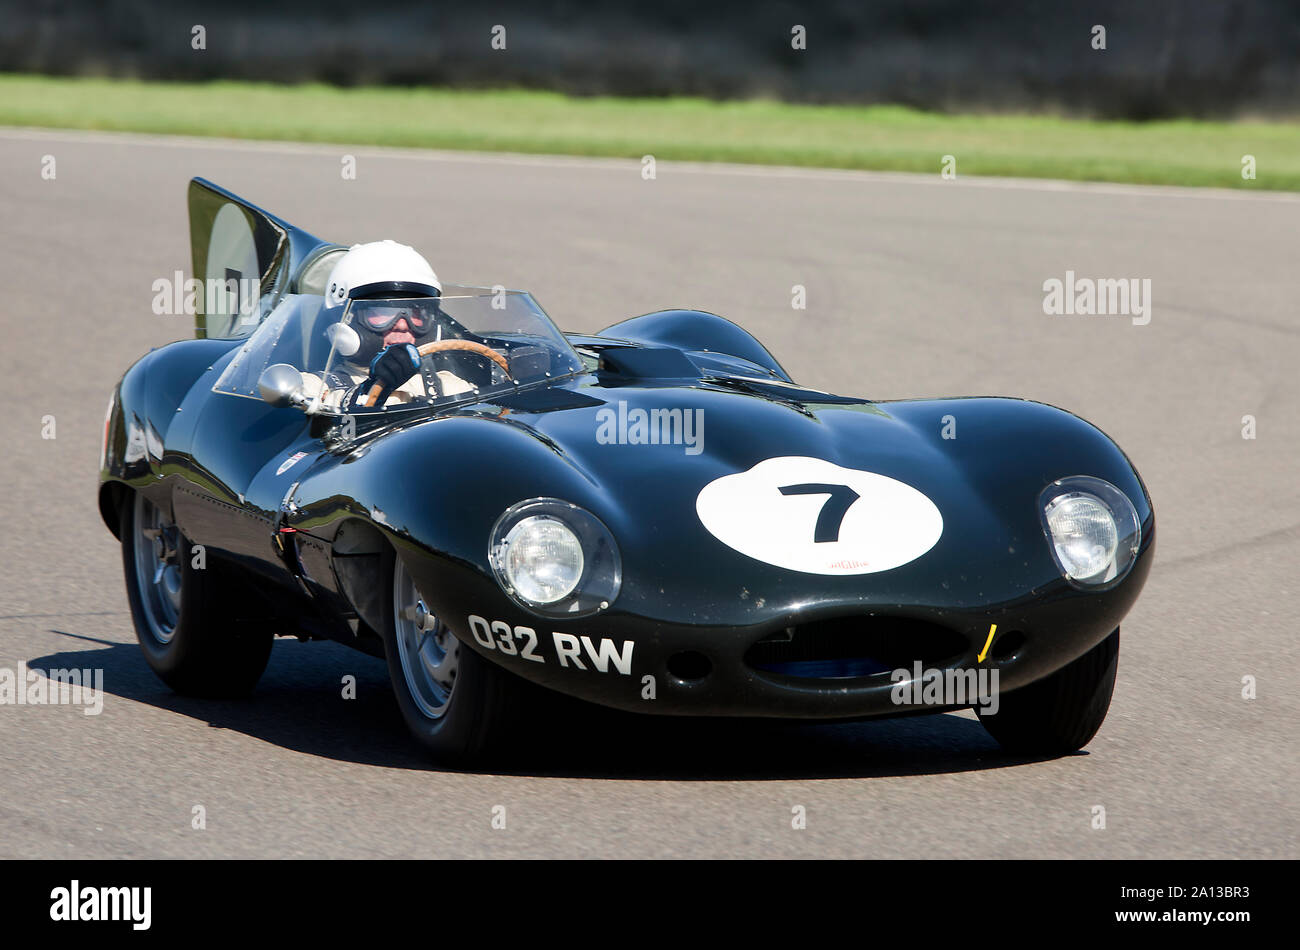 1955 Jaguar D-type 'long nose' driven by Gary Pearson in the Sussex Trophy race at The Goodwood Revival 13th Sept 2019 in Chichester, England.  Copyri Stock Photo